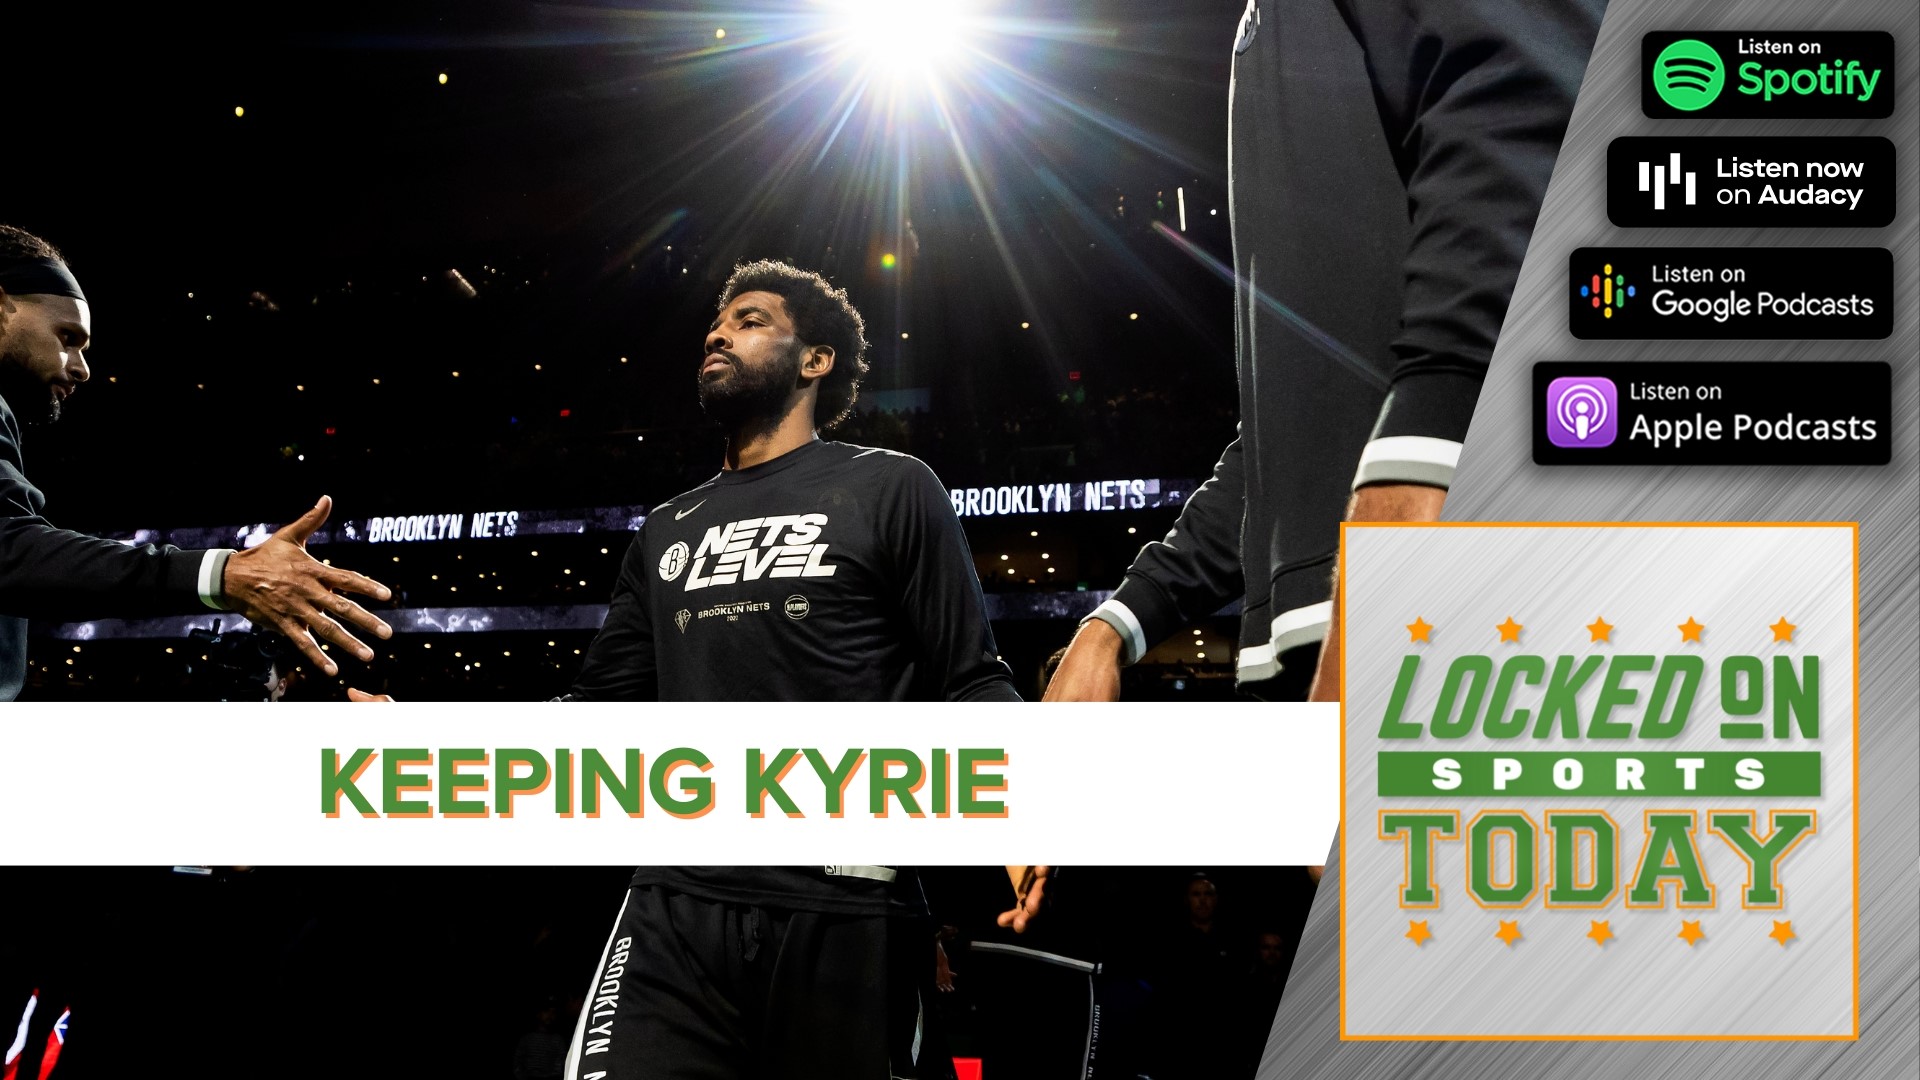 Discussing the day's top sports stories and topics from the fight for the Stanley Cup to why the Nets should try to keep Kyrie Irving.